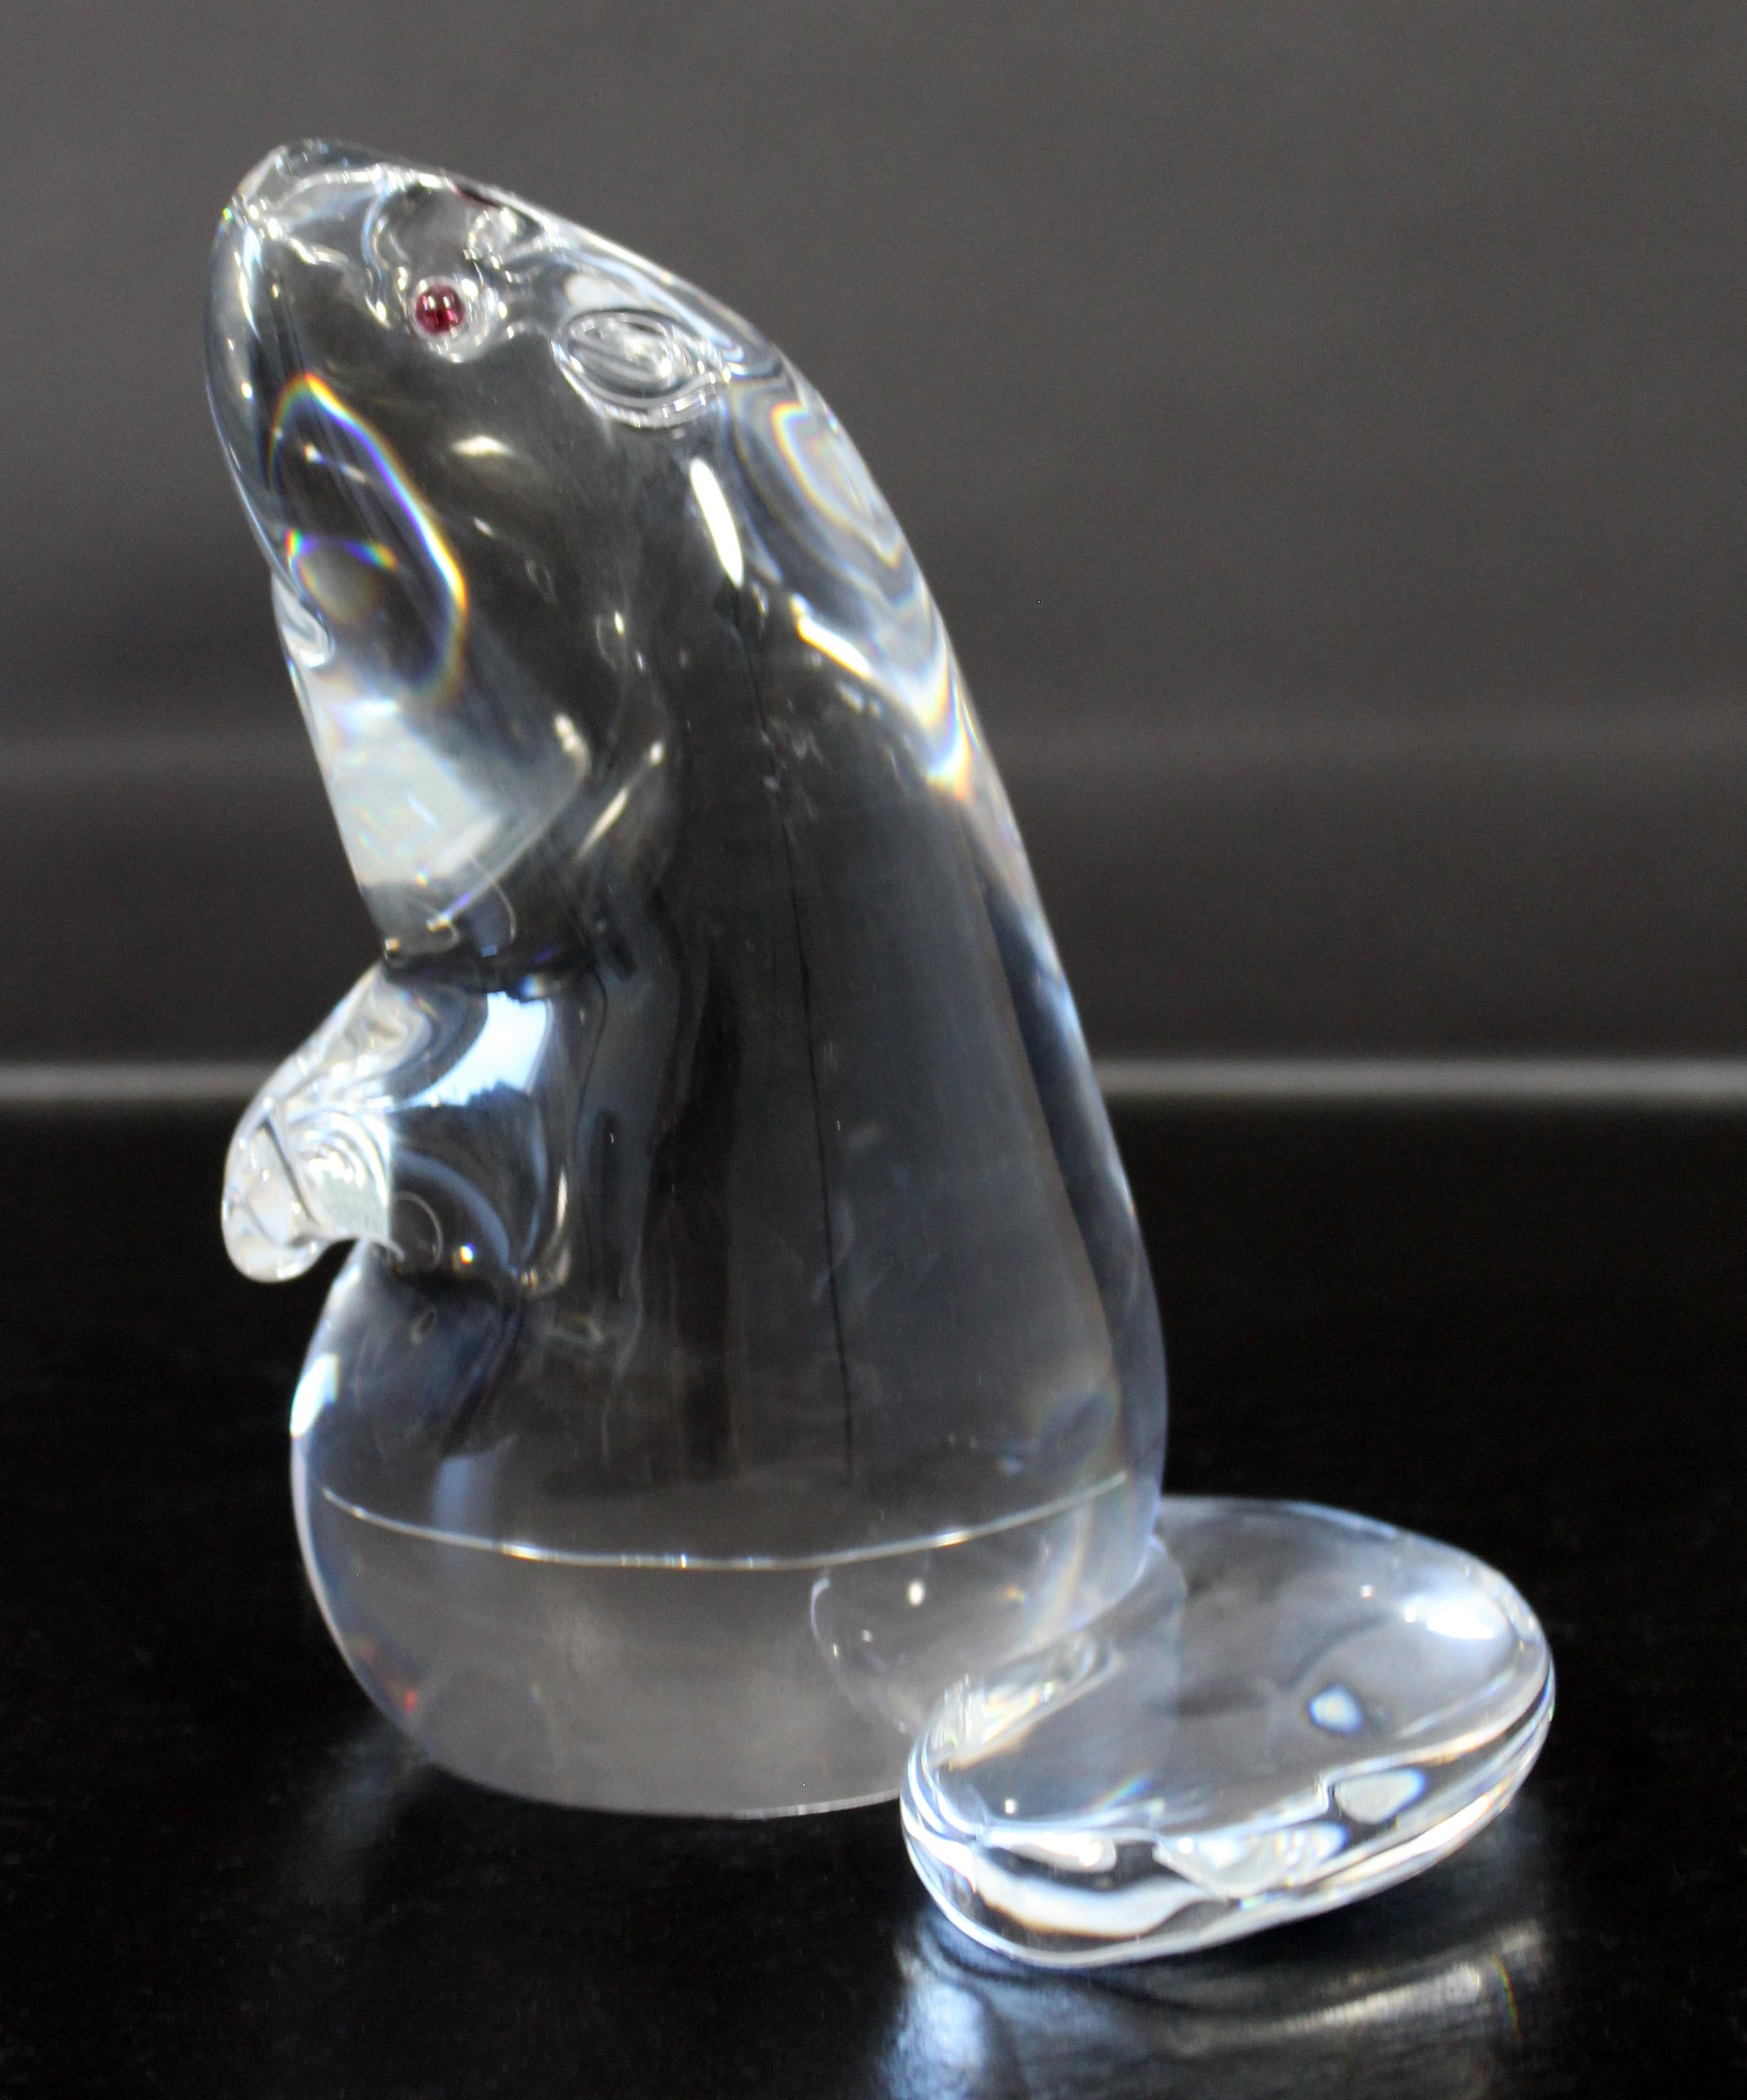 For your consideration is a magnificent, Steuben signed, crystal beaver statue, with garnets for eyes. In excellent condition. The dimensions are 5